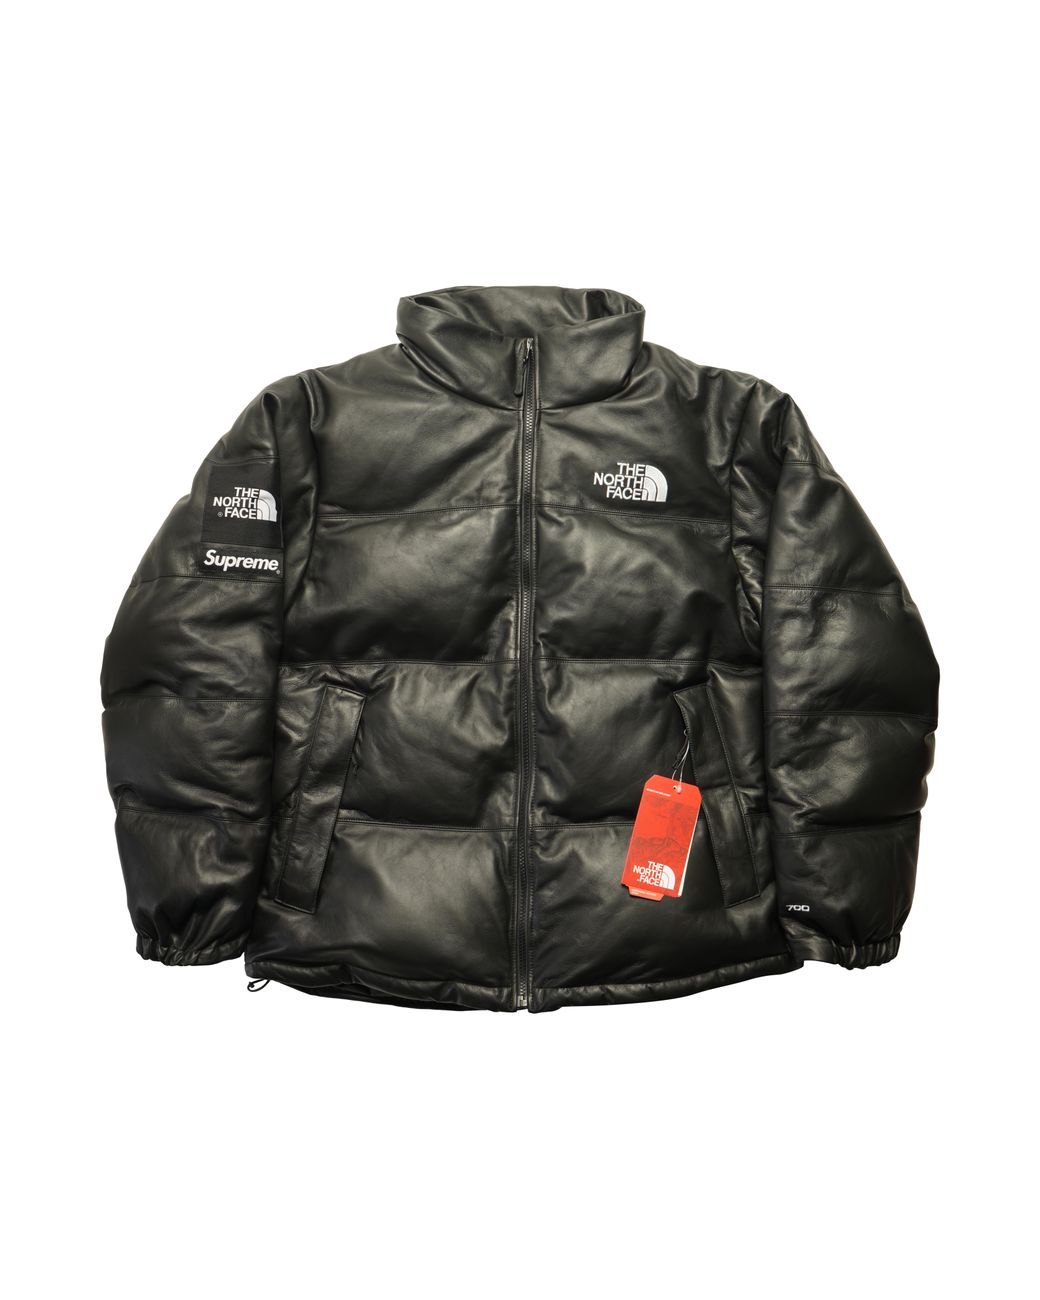 Supreme The North Face Leather Nuptse Jacket in Black for Men - Lyst